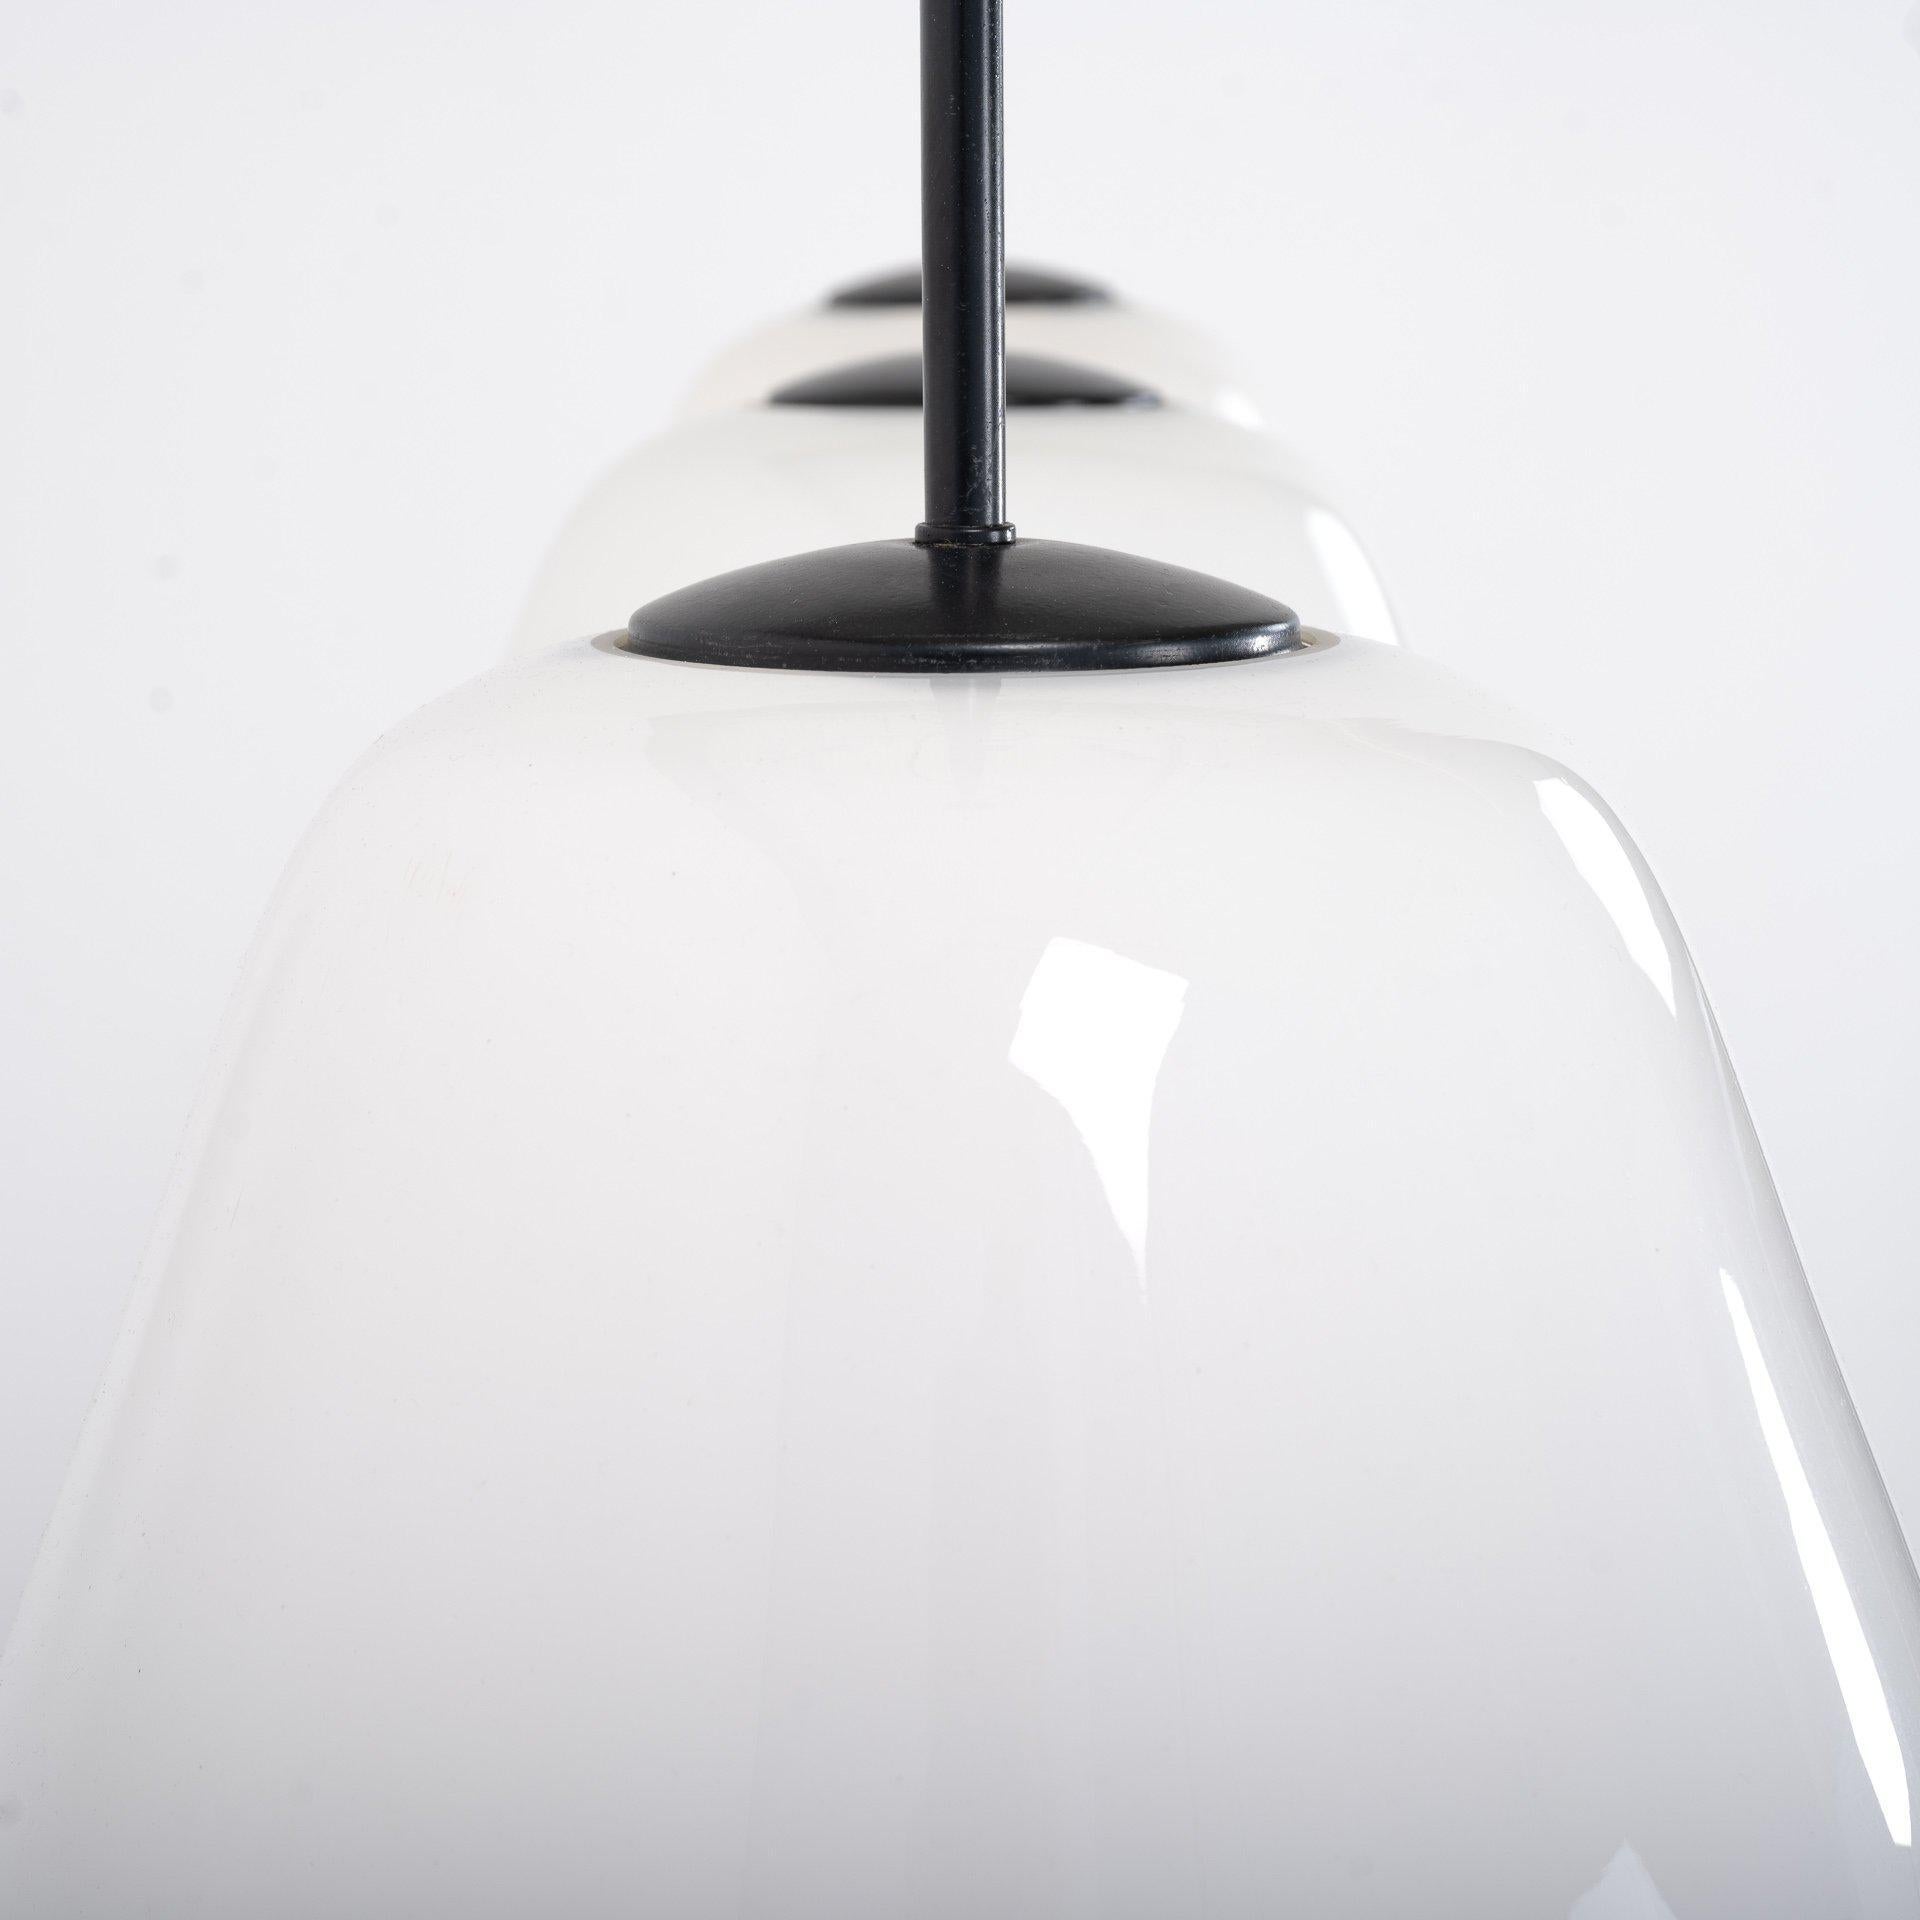 Vintage British school opaline glass trapezoid pendant lights.
An amazing run of antique opaline trapezoid pendant lights, salvaged from an all-girls grammar school in Manchester.

English made circa 1940 by Falk, Stadelmann and Co. Ltd

These